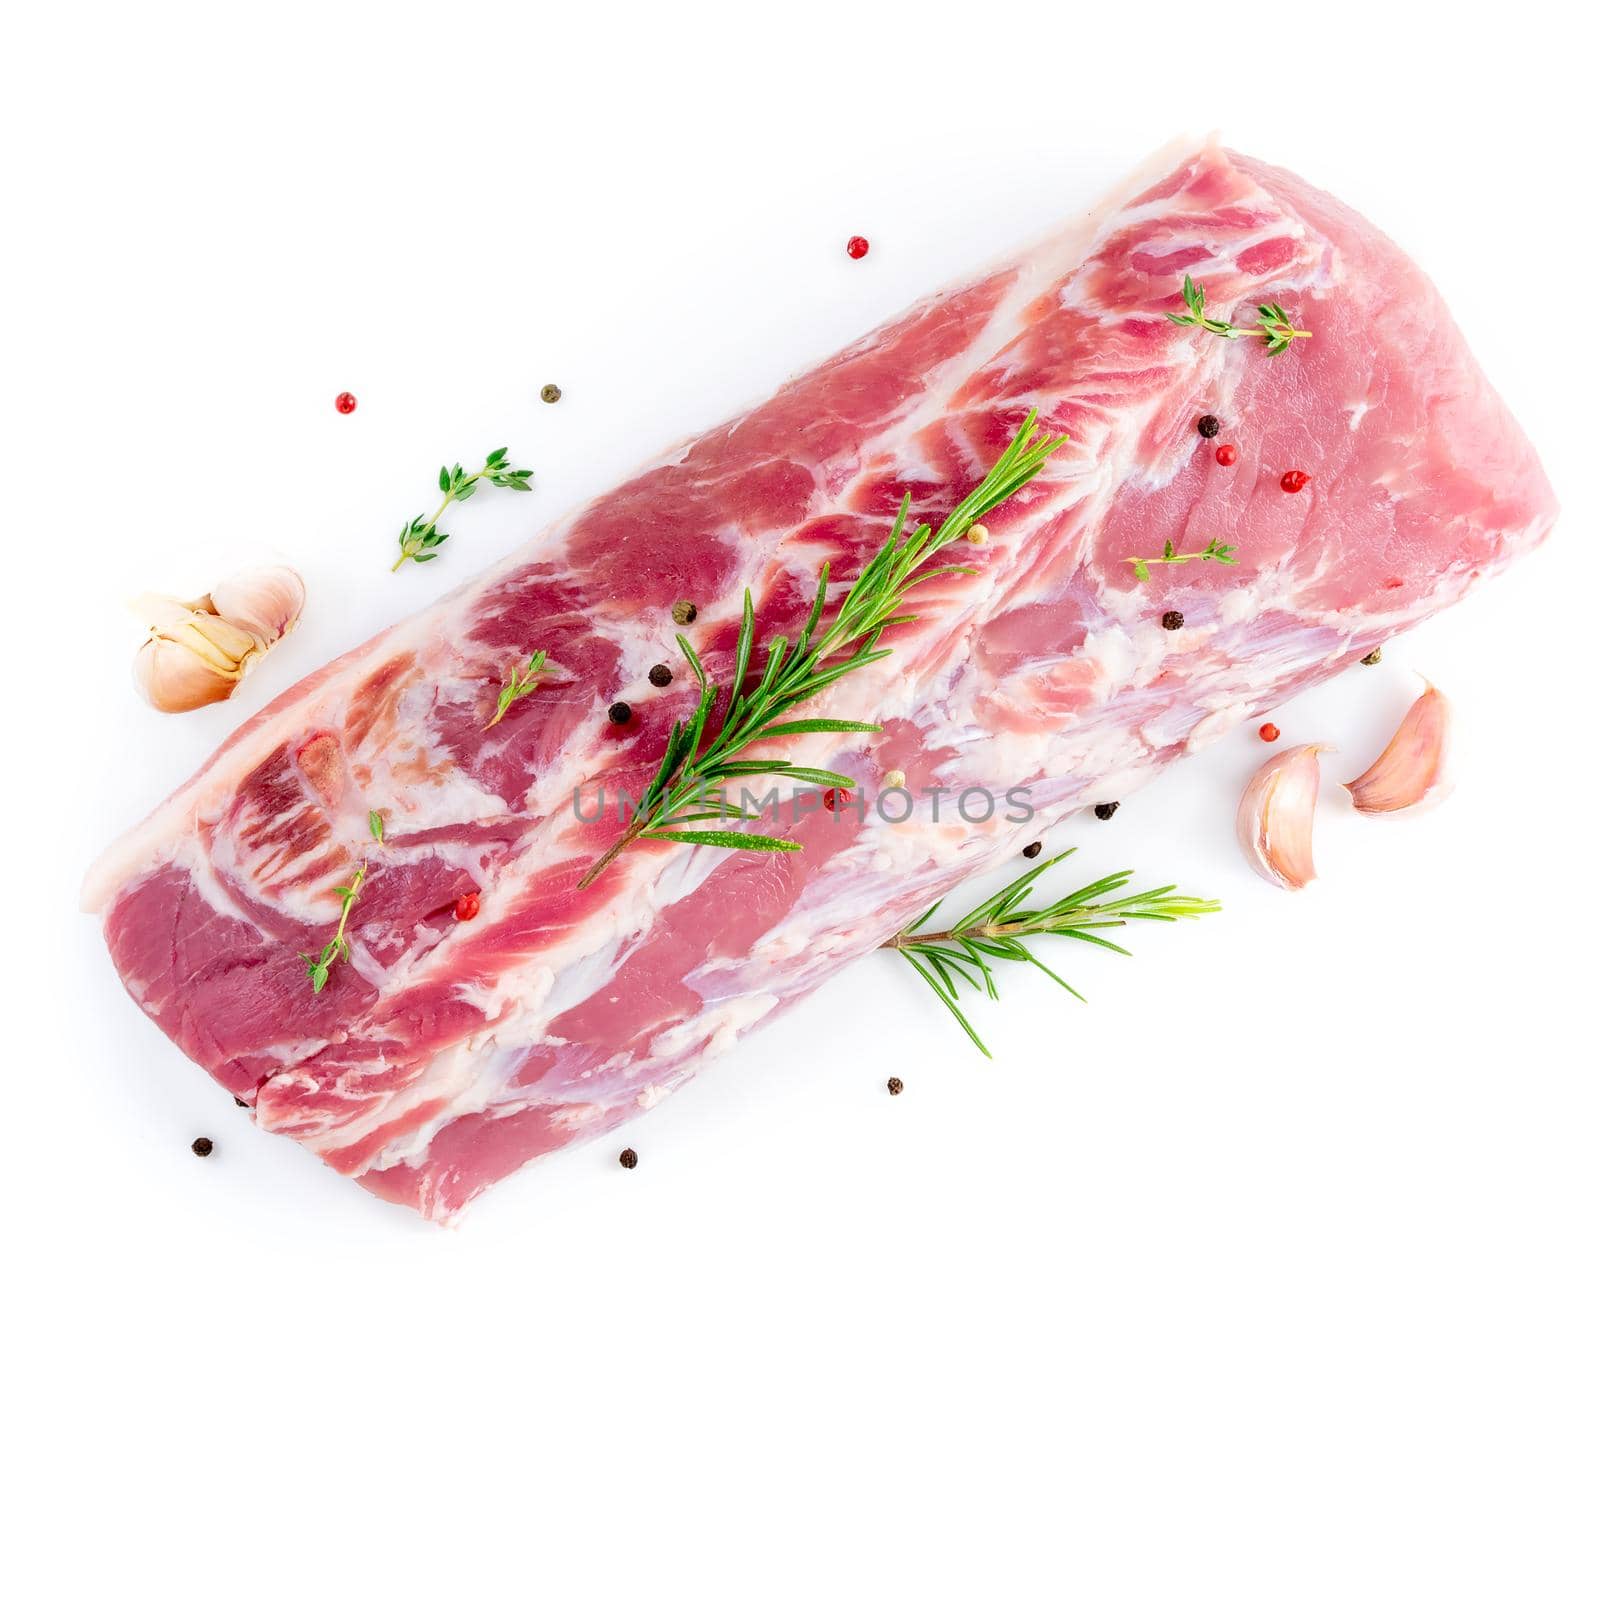 large piece of meat, raw pork carbonate fillet isolated on white background, with rosemary by NataBene